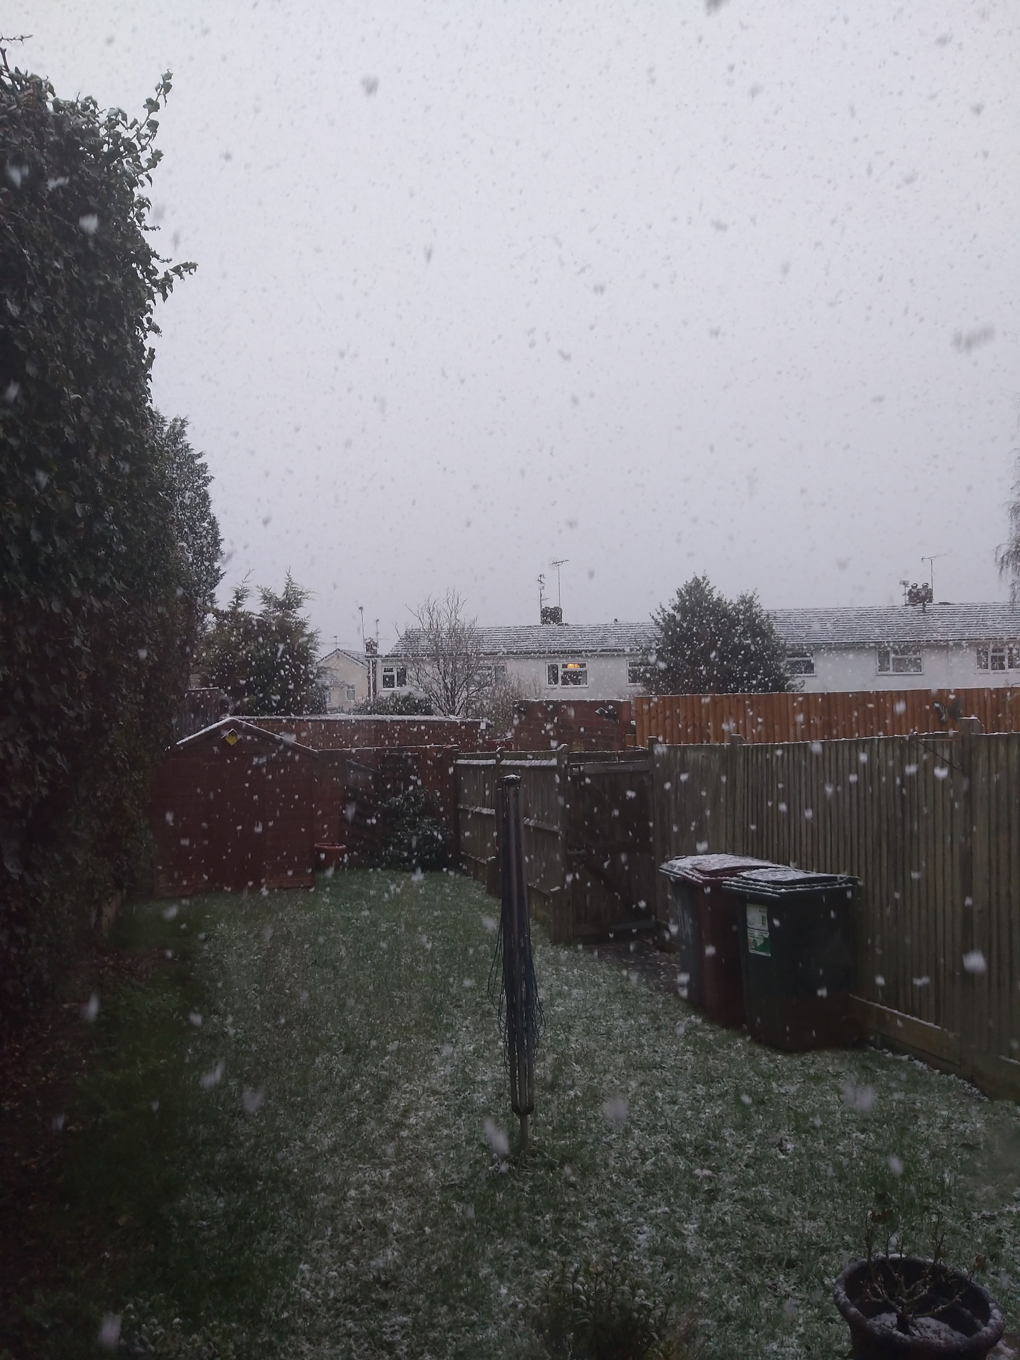 A view of the back garden with snowflakes speckled all across it.